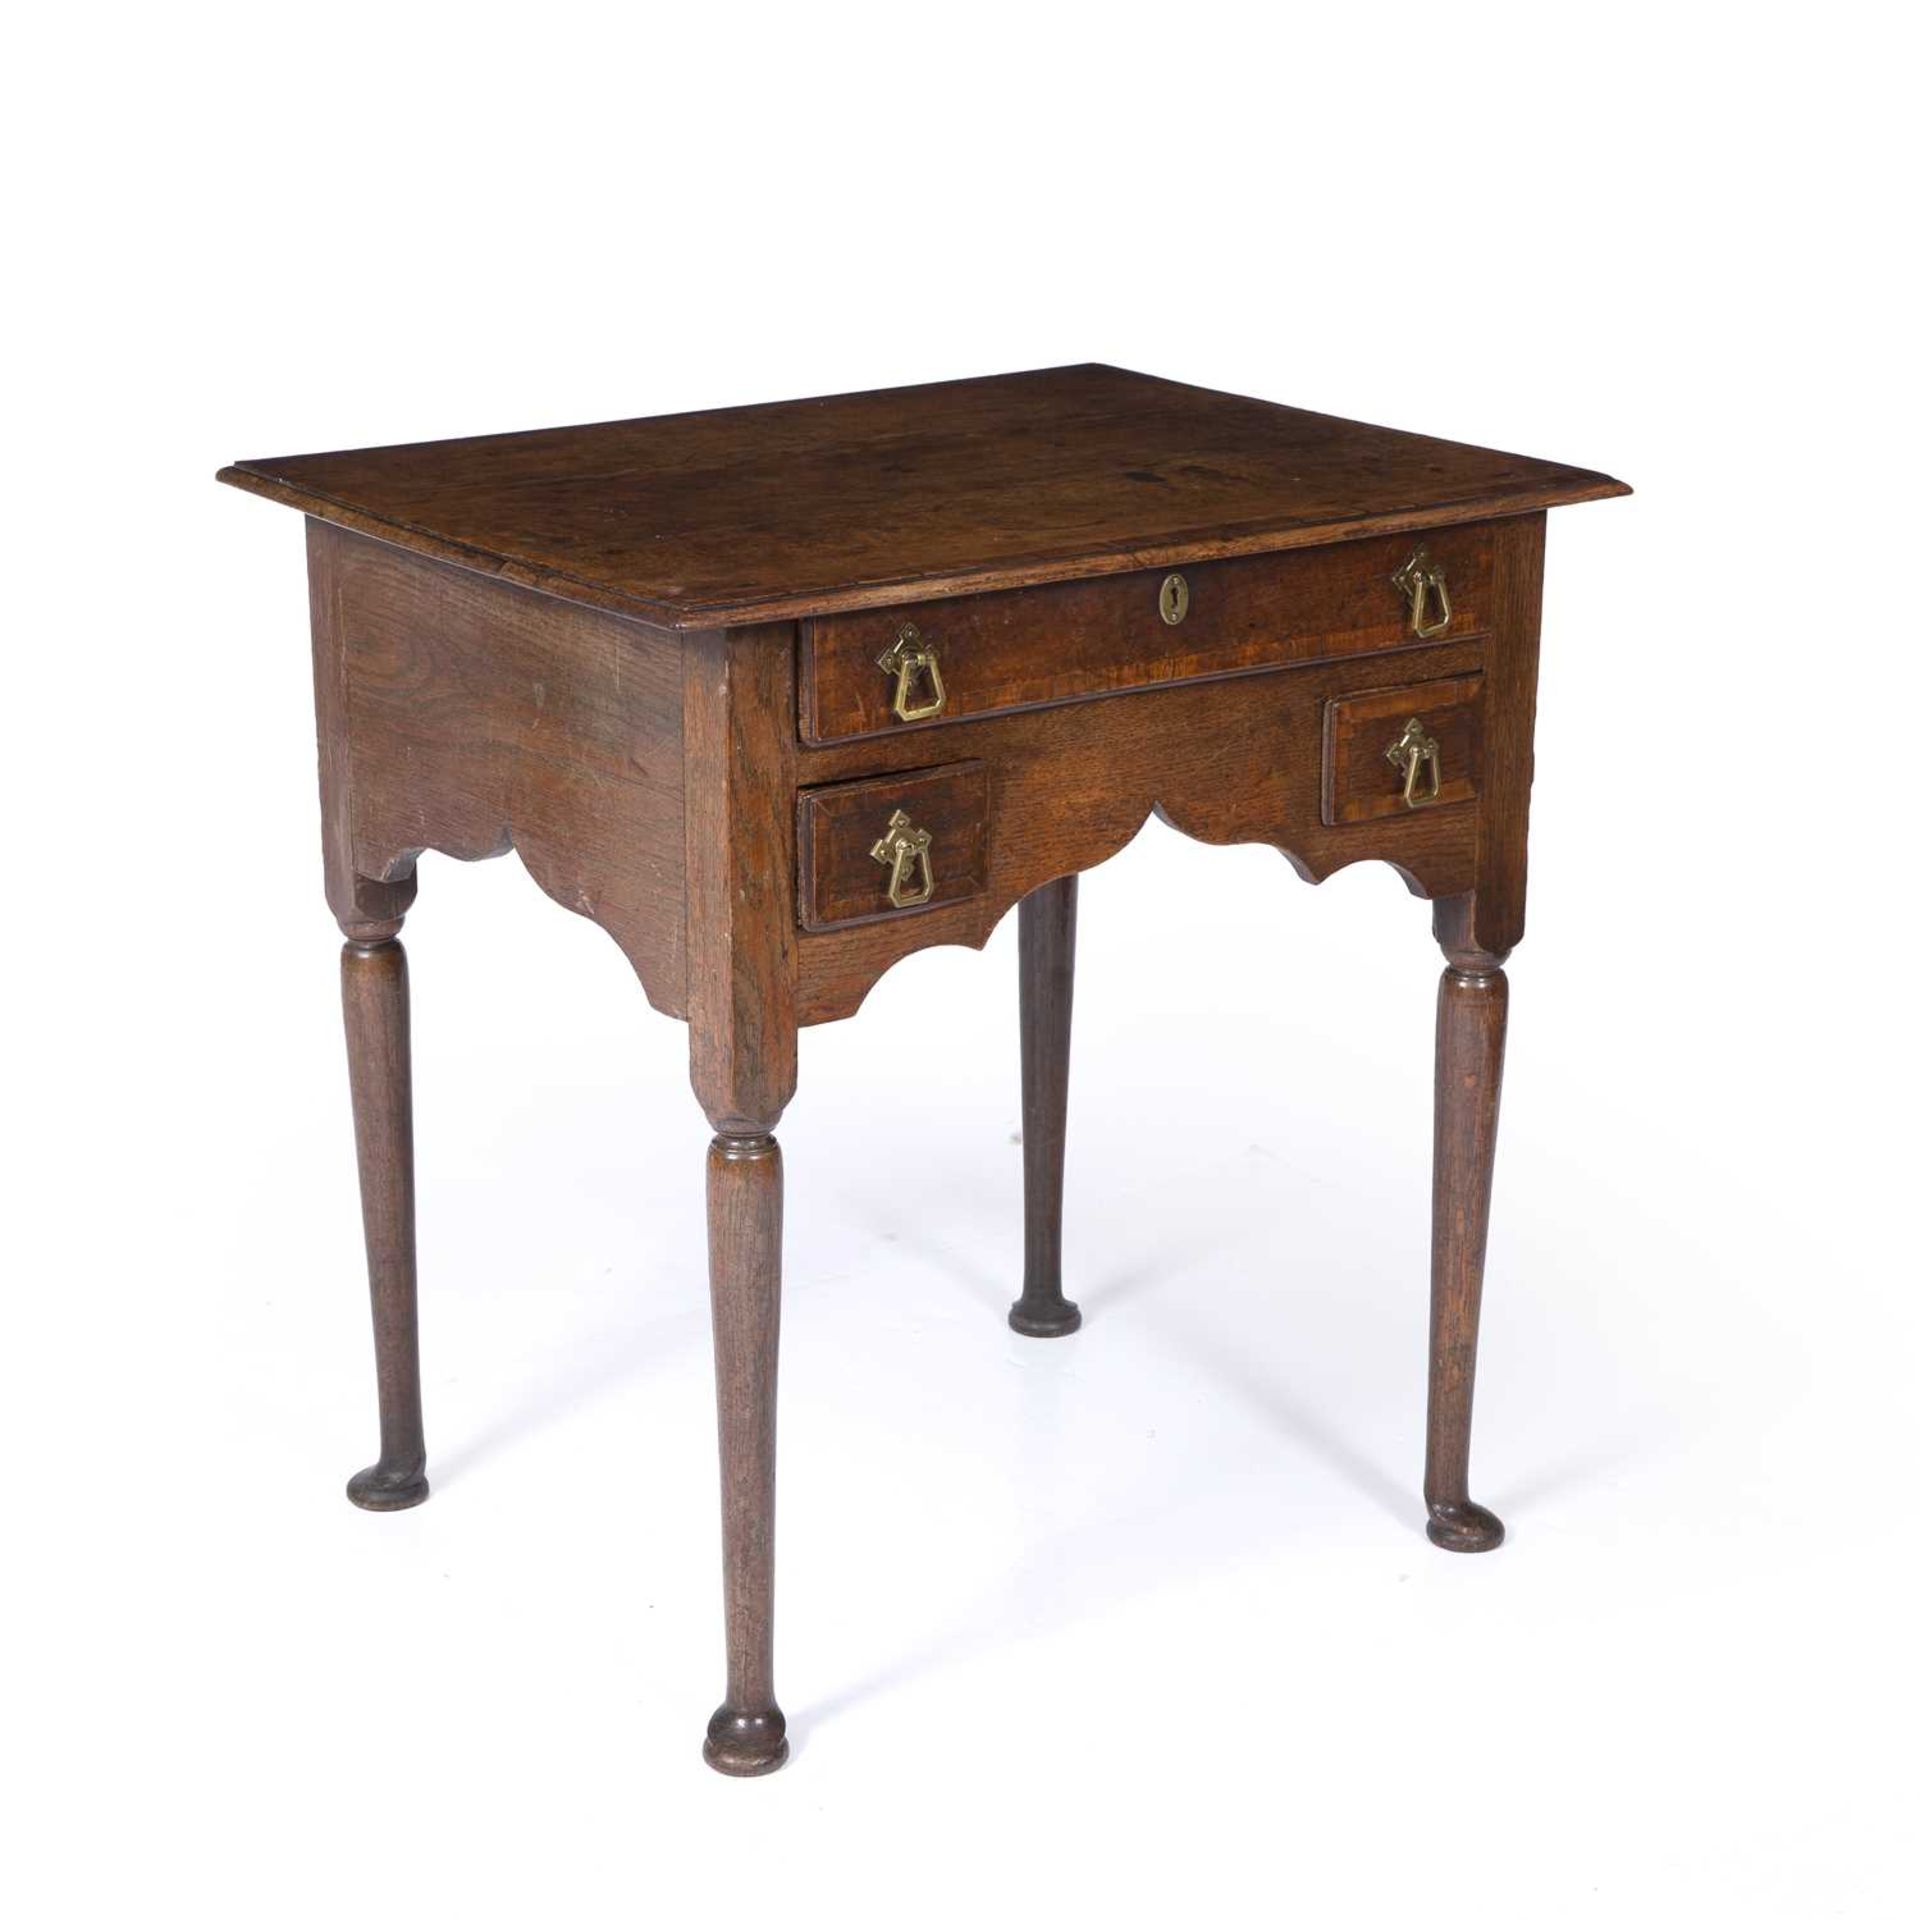 An 18th century oak low boy with three drawers and bras handles raised on turned legs and pad - Image 2 of 6